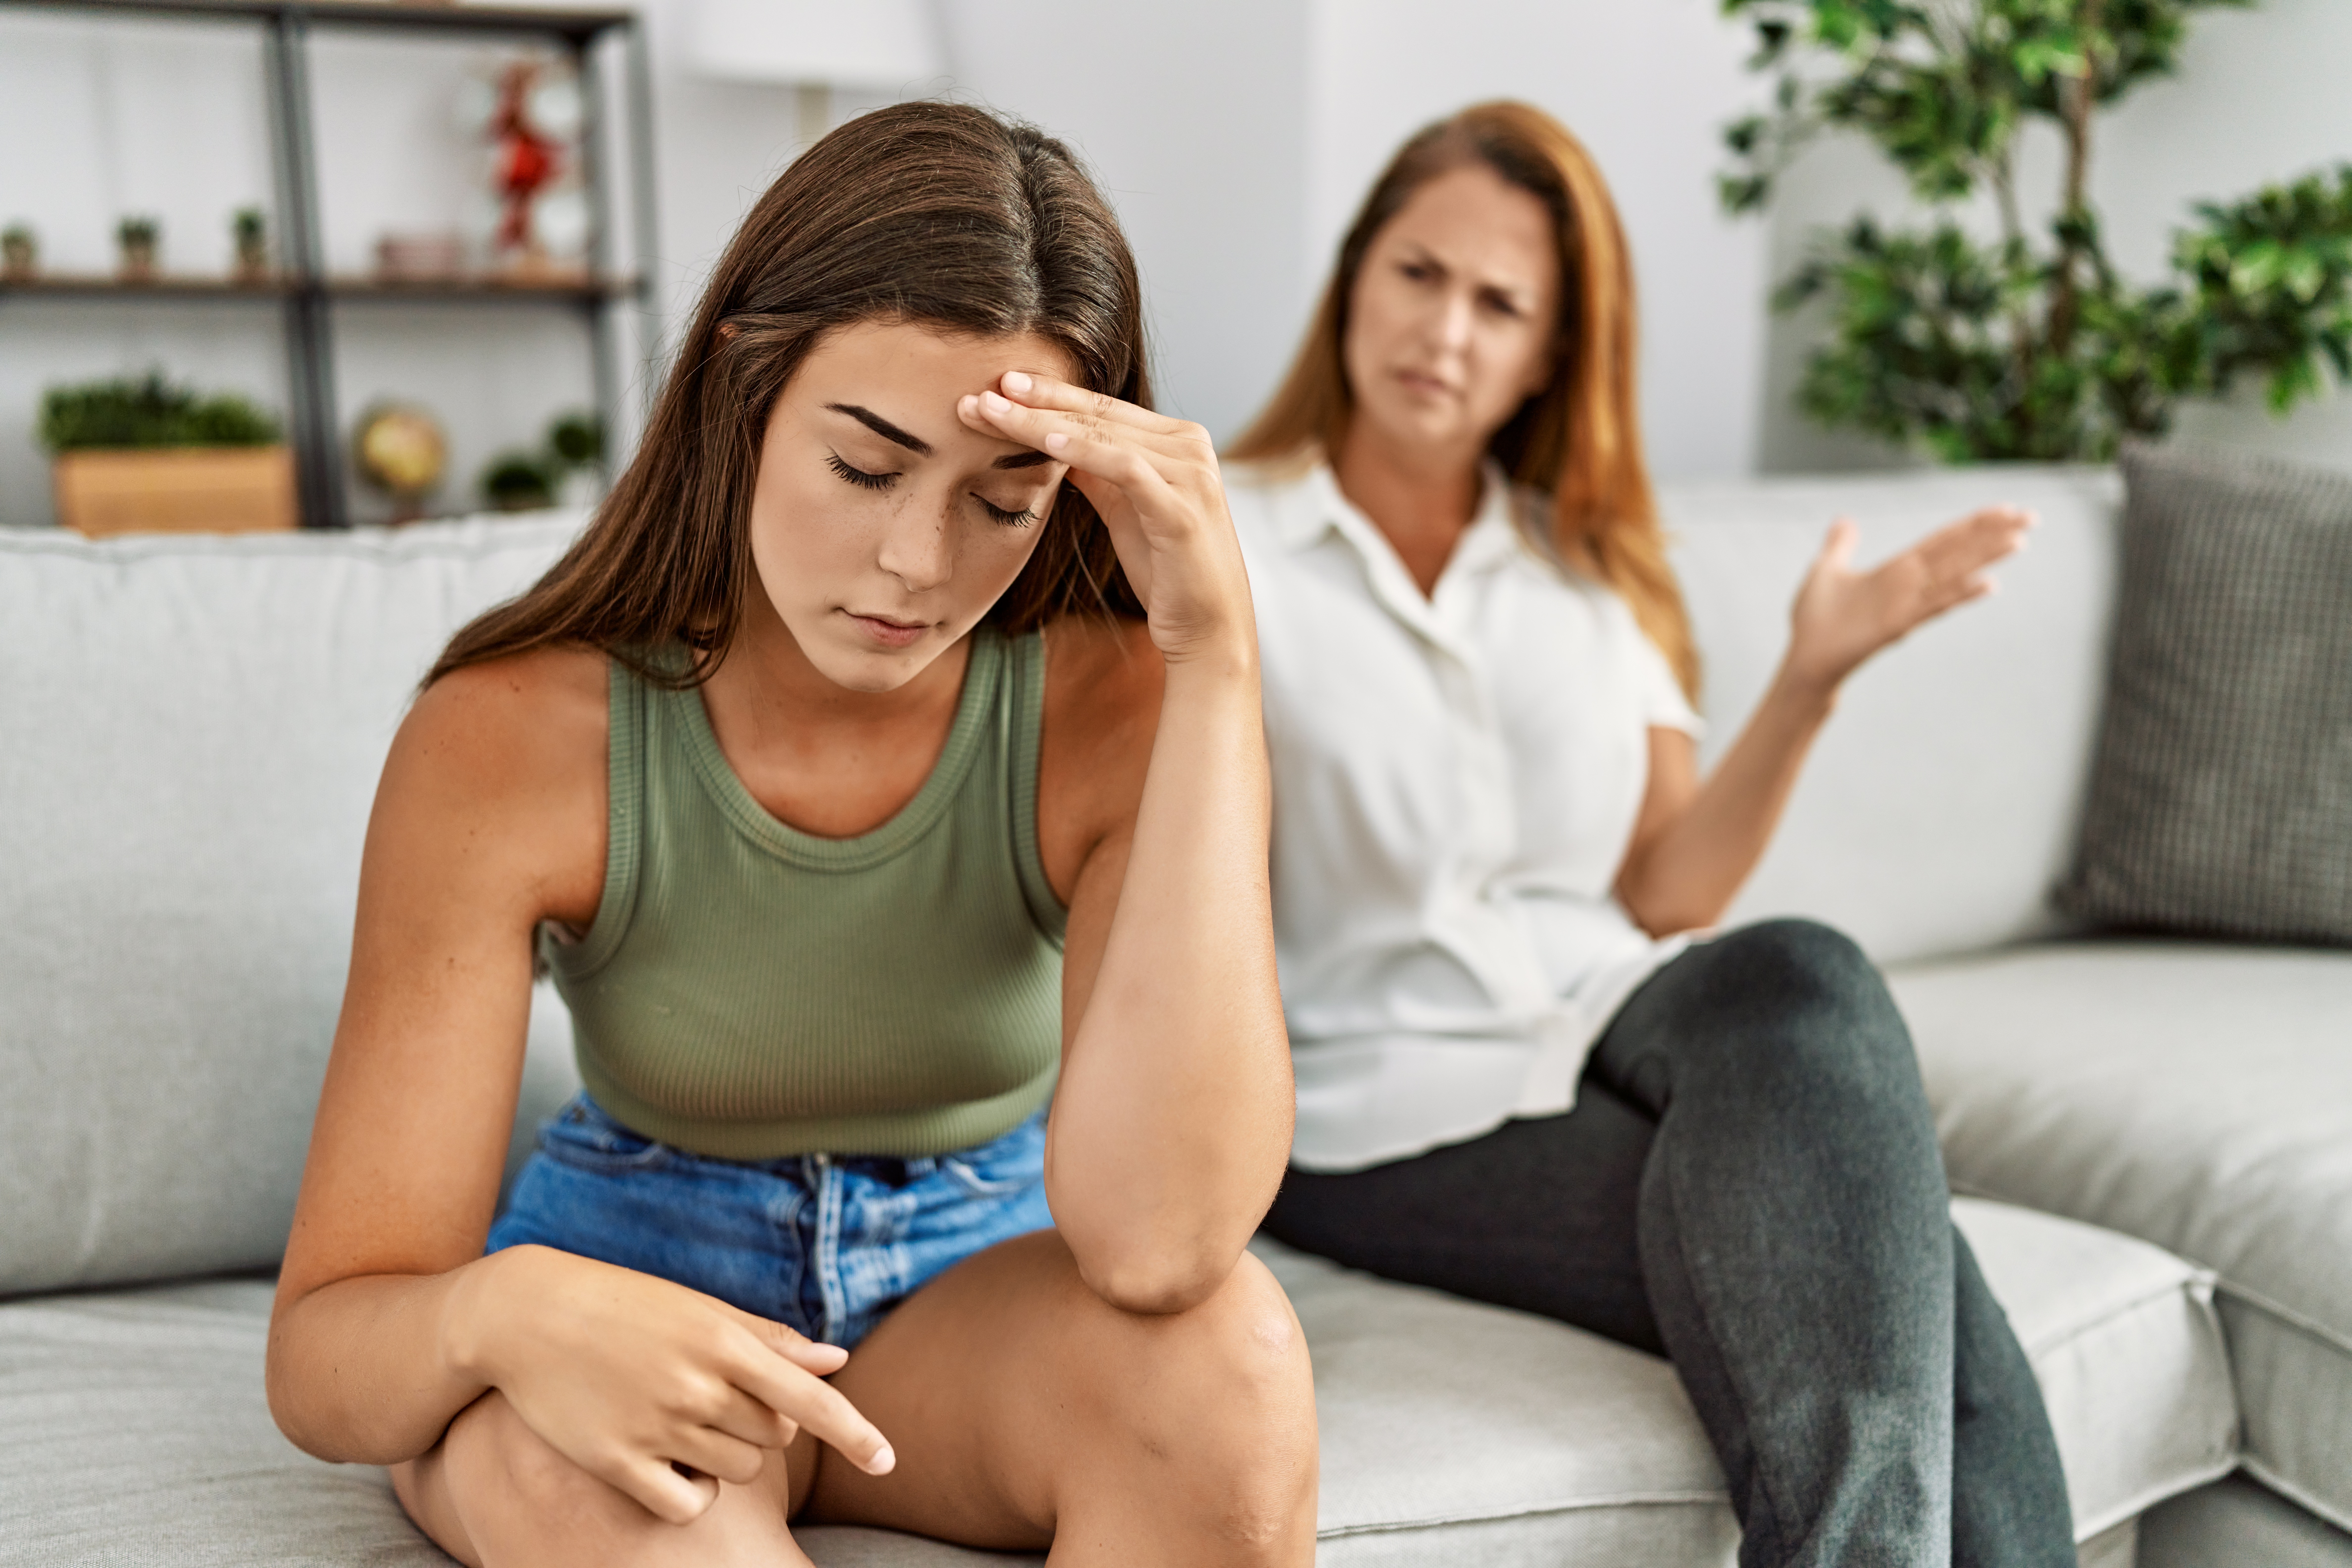 A young woman feeling tired during an argument with her mom | Source: Shutterstock